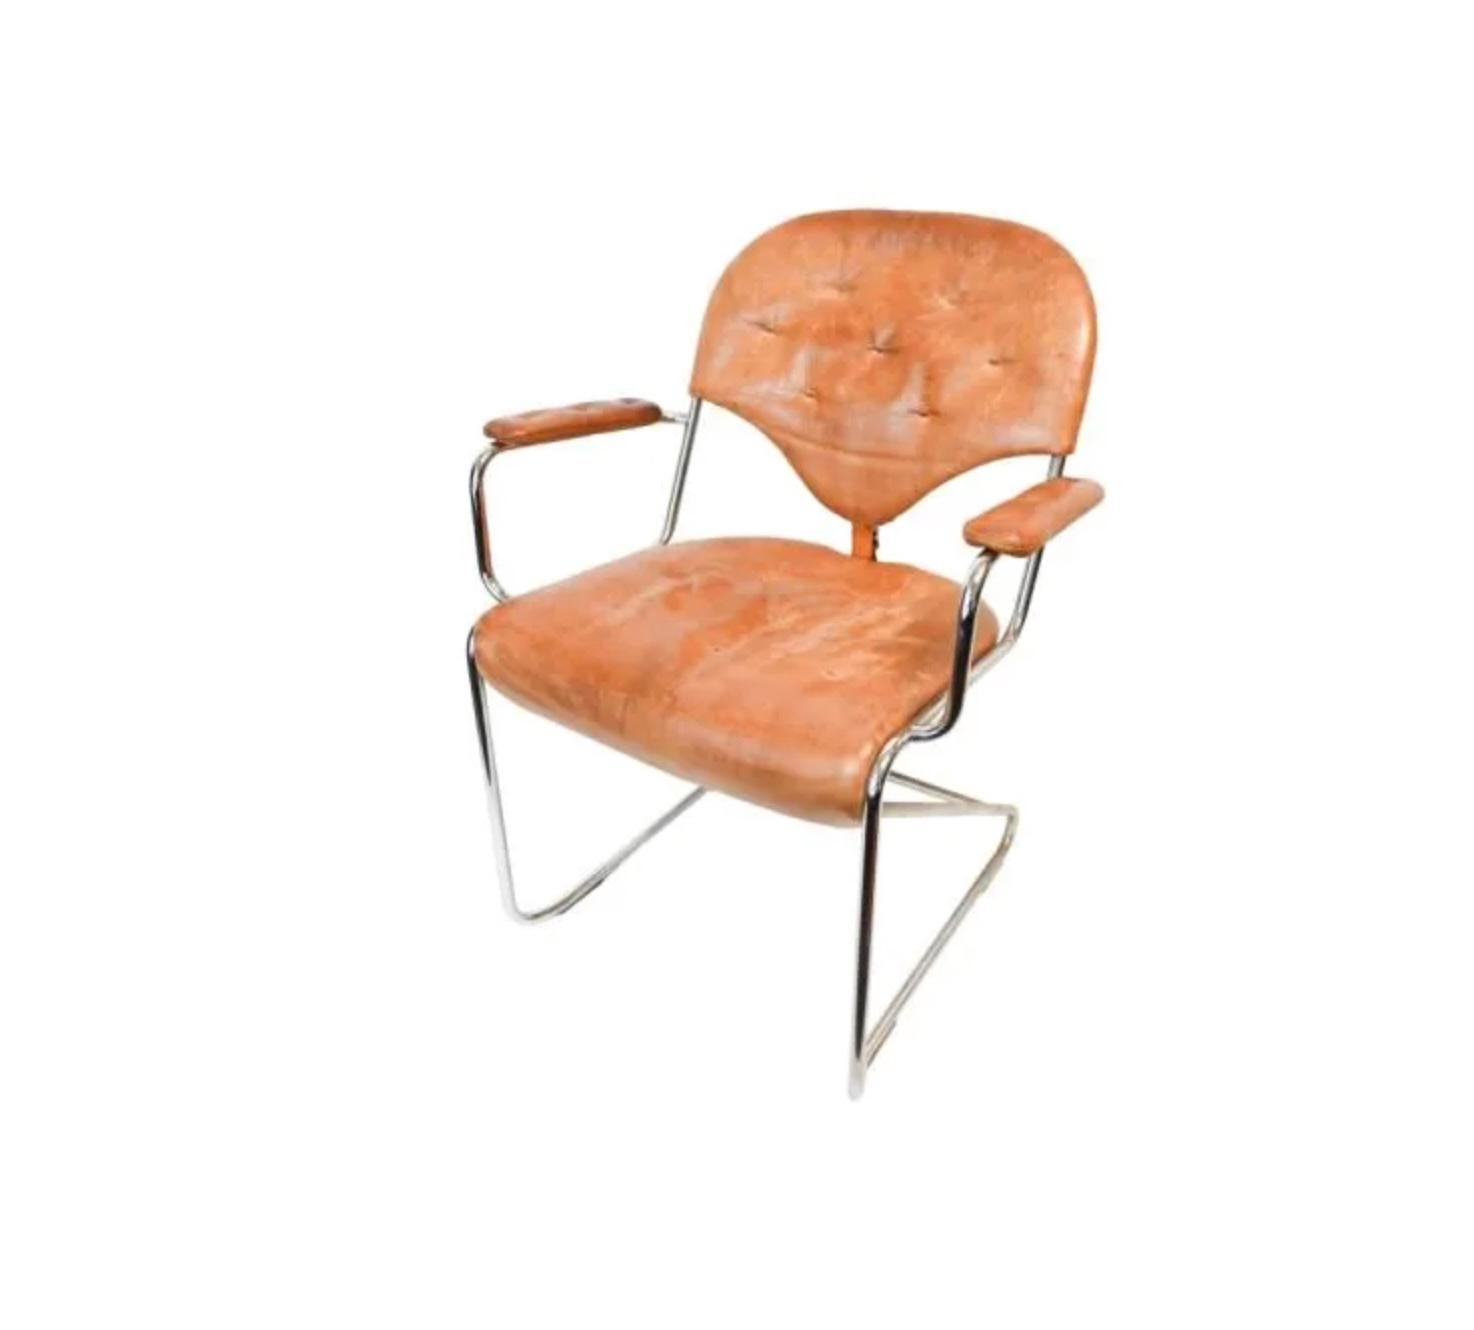 Rare Set of 4 Vintage Mid Century Modern leather and chrome designed by Sam Larsson for Dux of Sweden. Leather cushion and backrest with belt strap connecting them together on a bent chrome tube steel frame. The set has all matching chairs with the